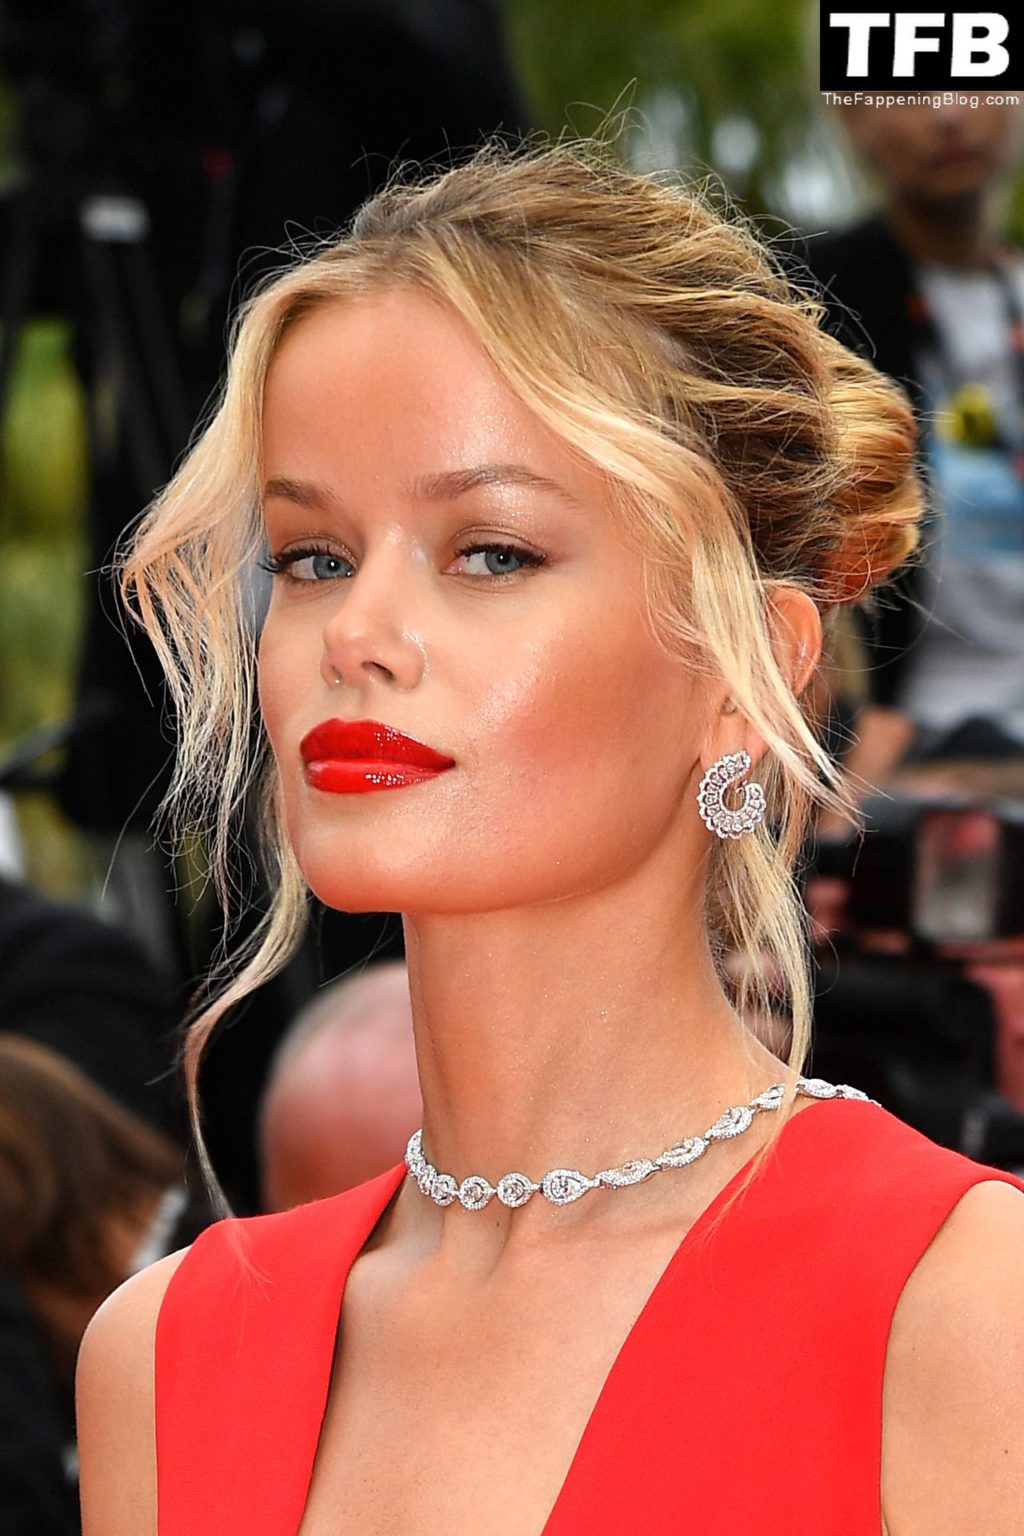 Frida Aasen Sexy The Fappening Blog 70 1024x1536 - Frida Aasen Looks Stunning in a Red Dress at the 75th Annual Cannes Film Festival (153 Photos)